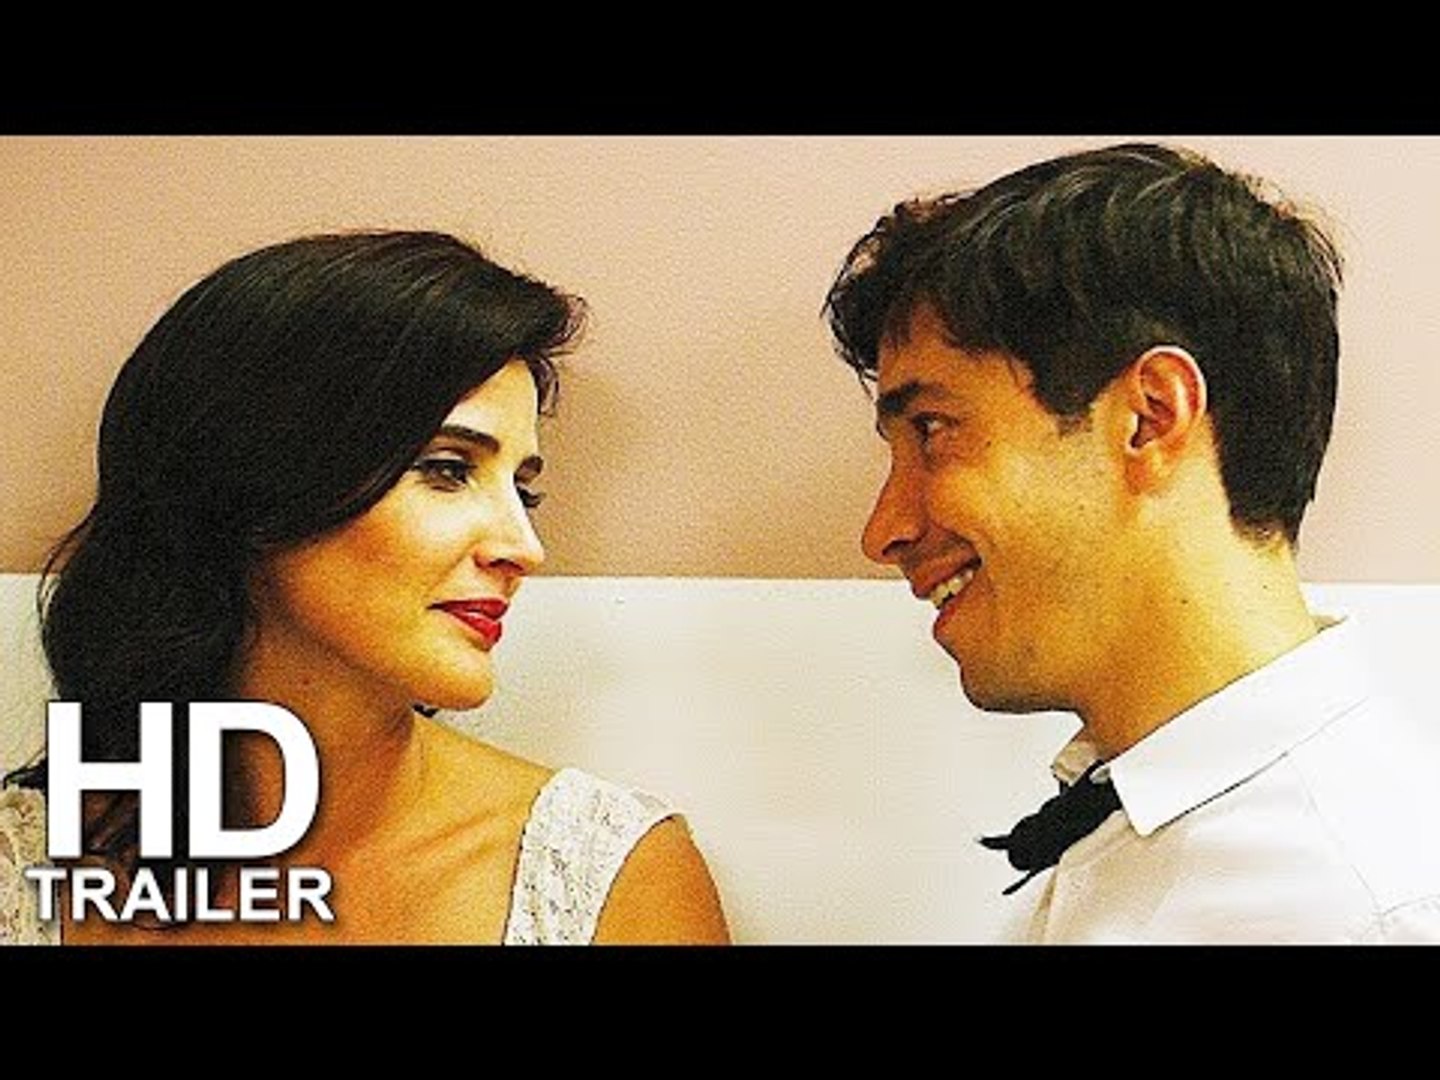 Literally Right Before Aaron Trailer 2017 Cobie Smulders Justin Long Comedy Movie Hd